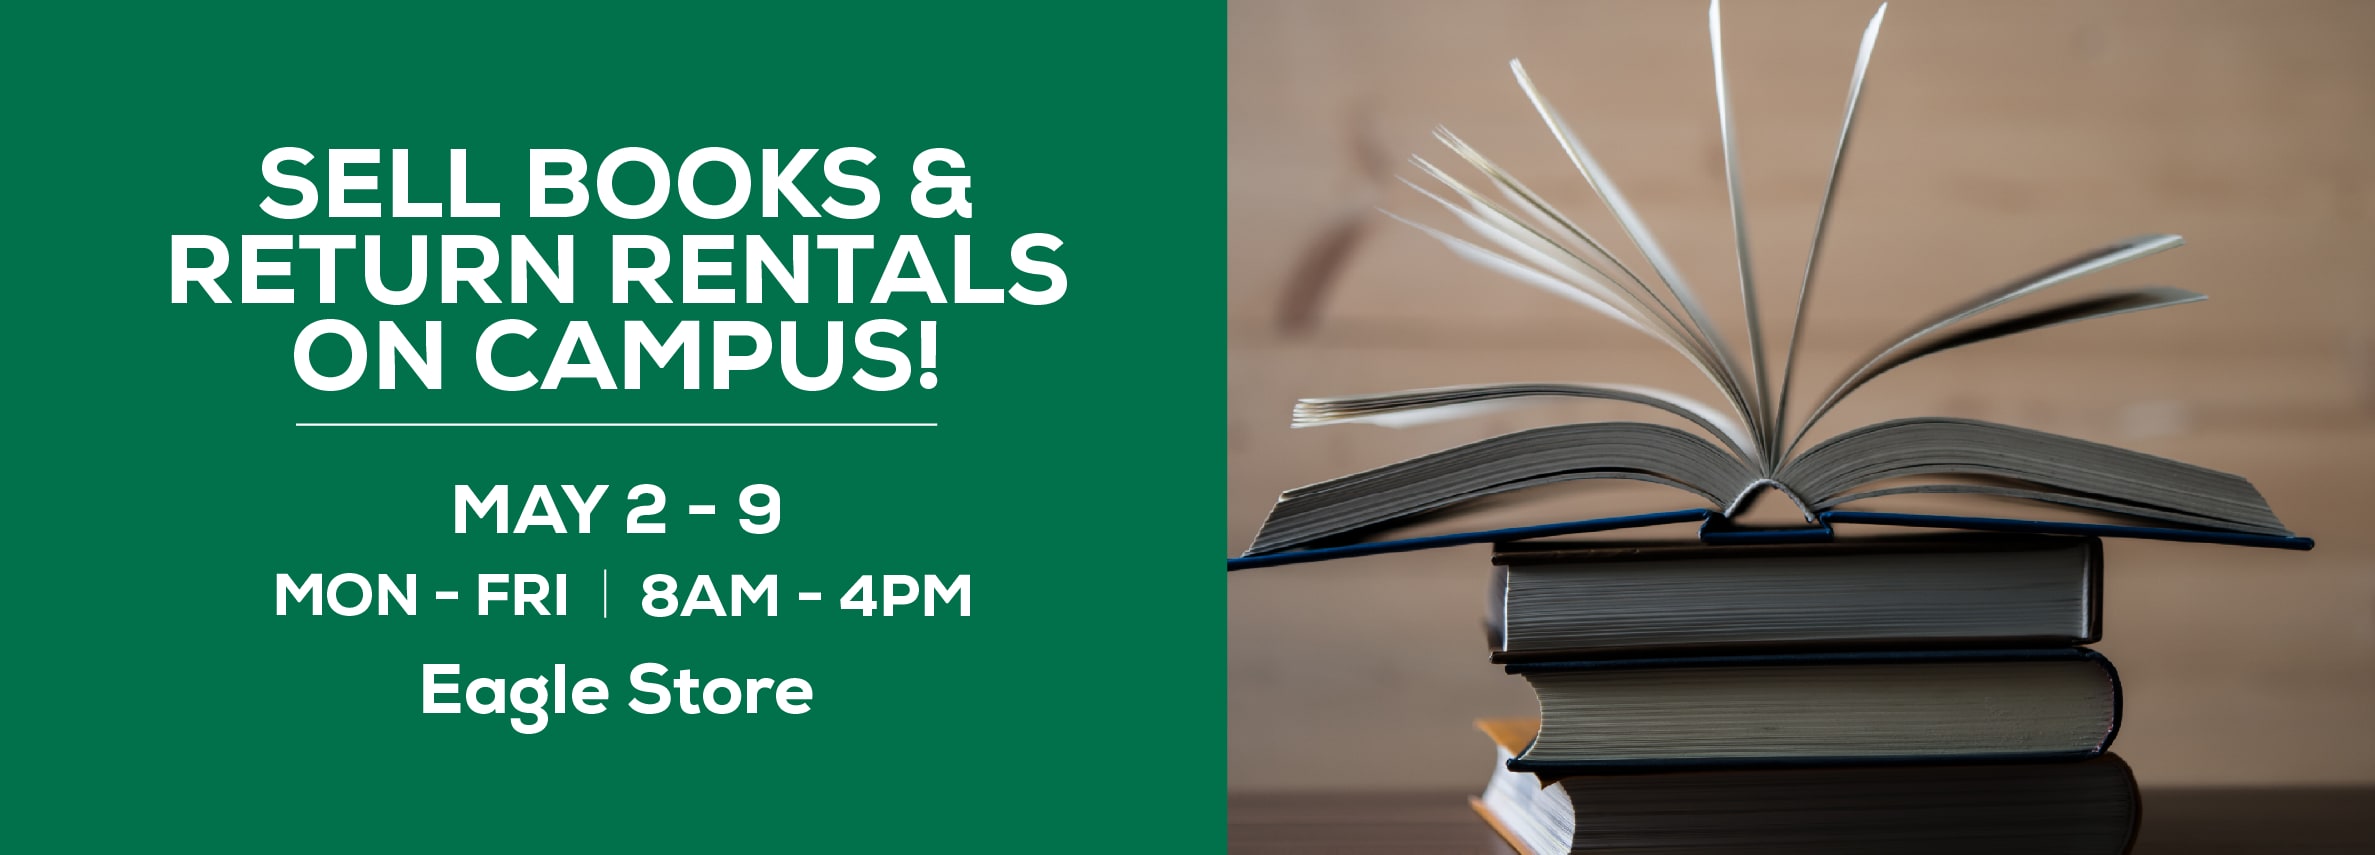 Sell books and return rentals on campus! May 2 through 9. Monday through Friday from 8 am to 4pm at the Eagle Store.